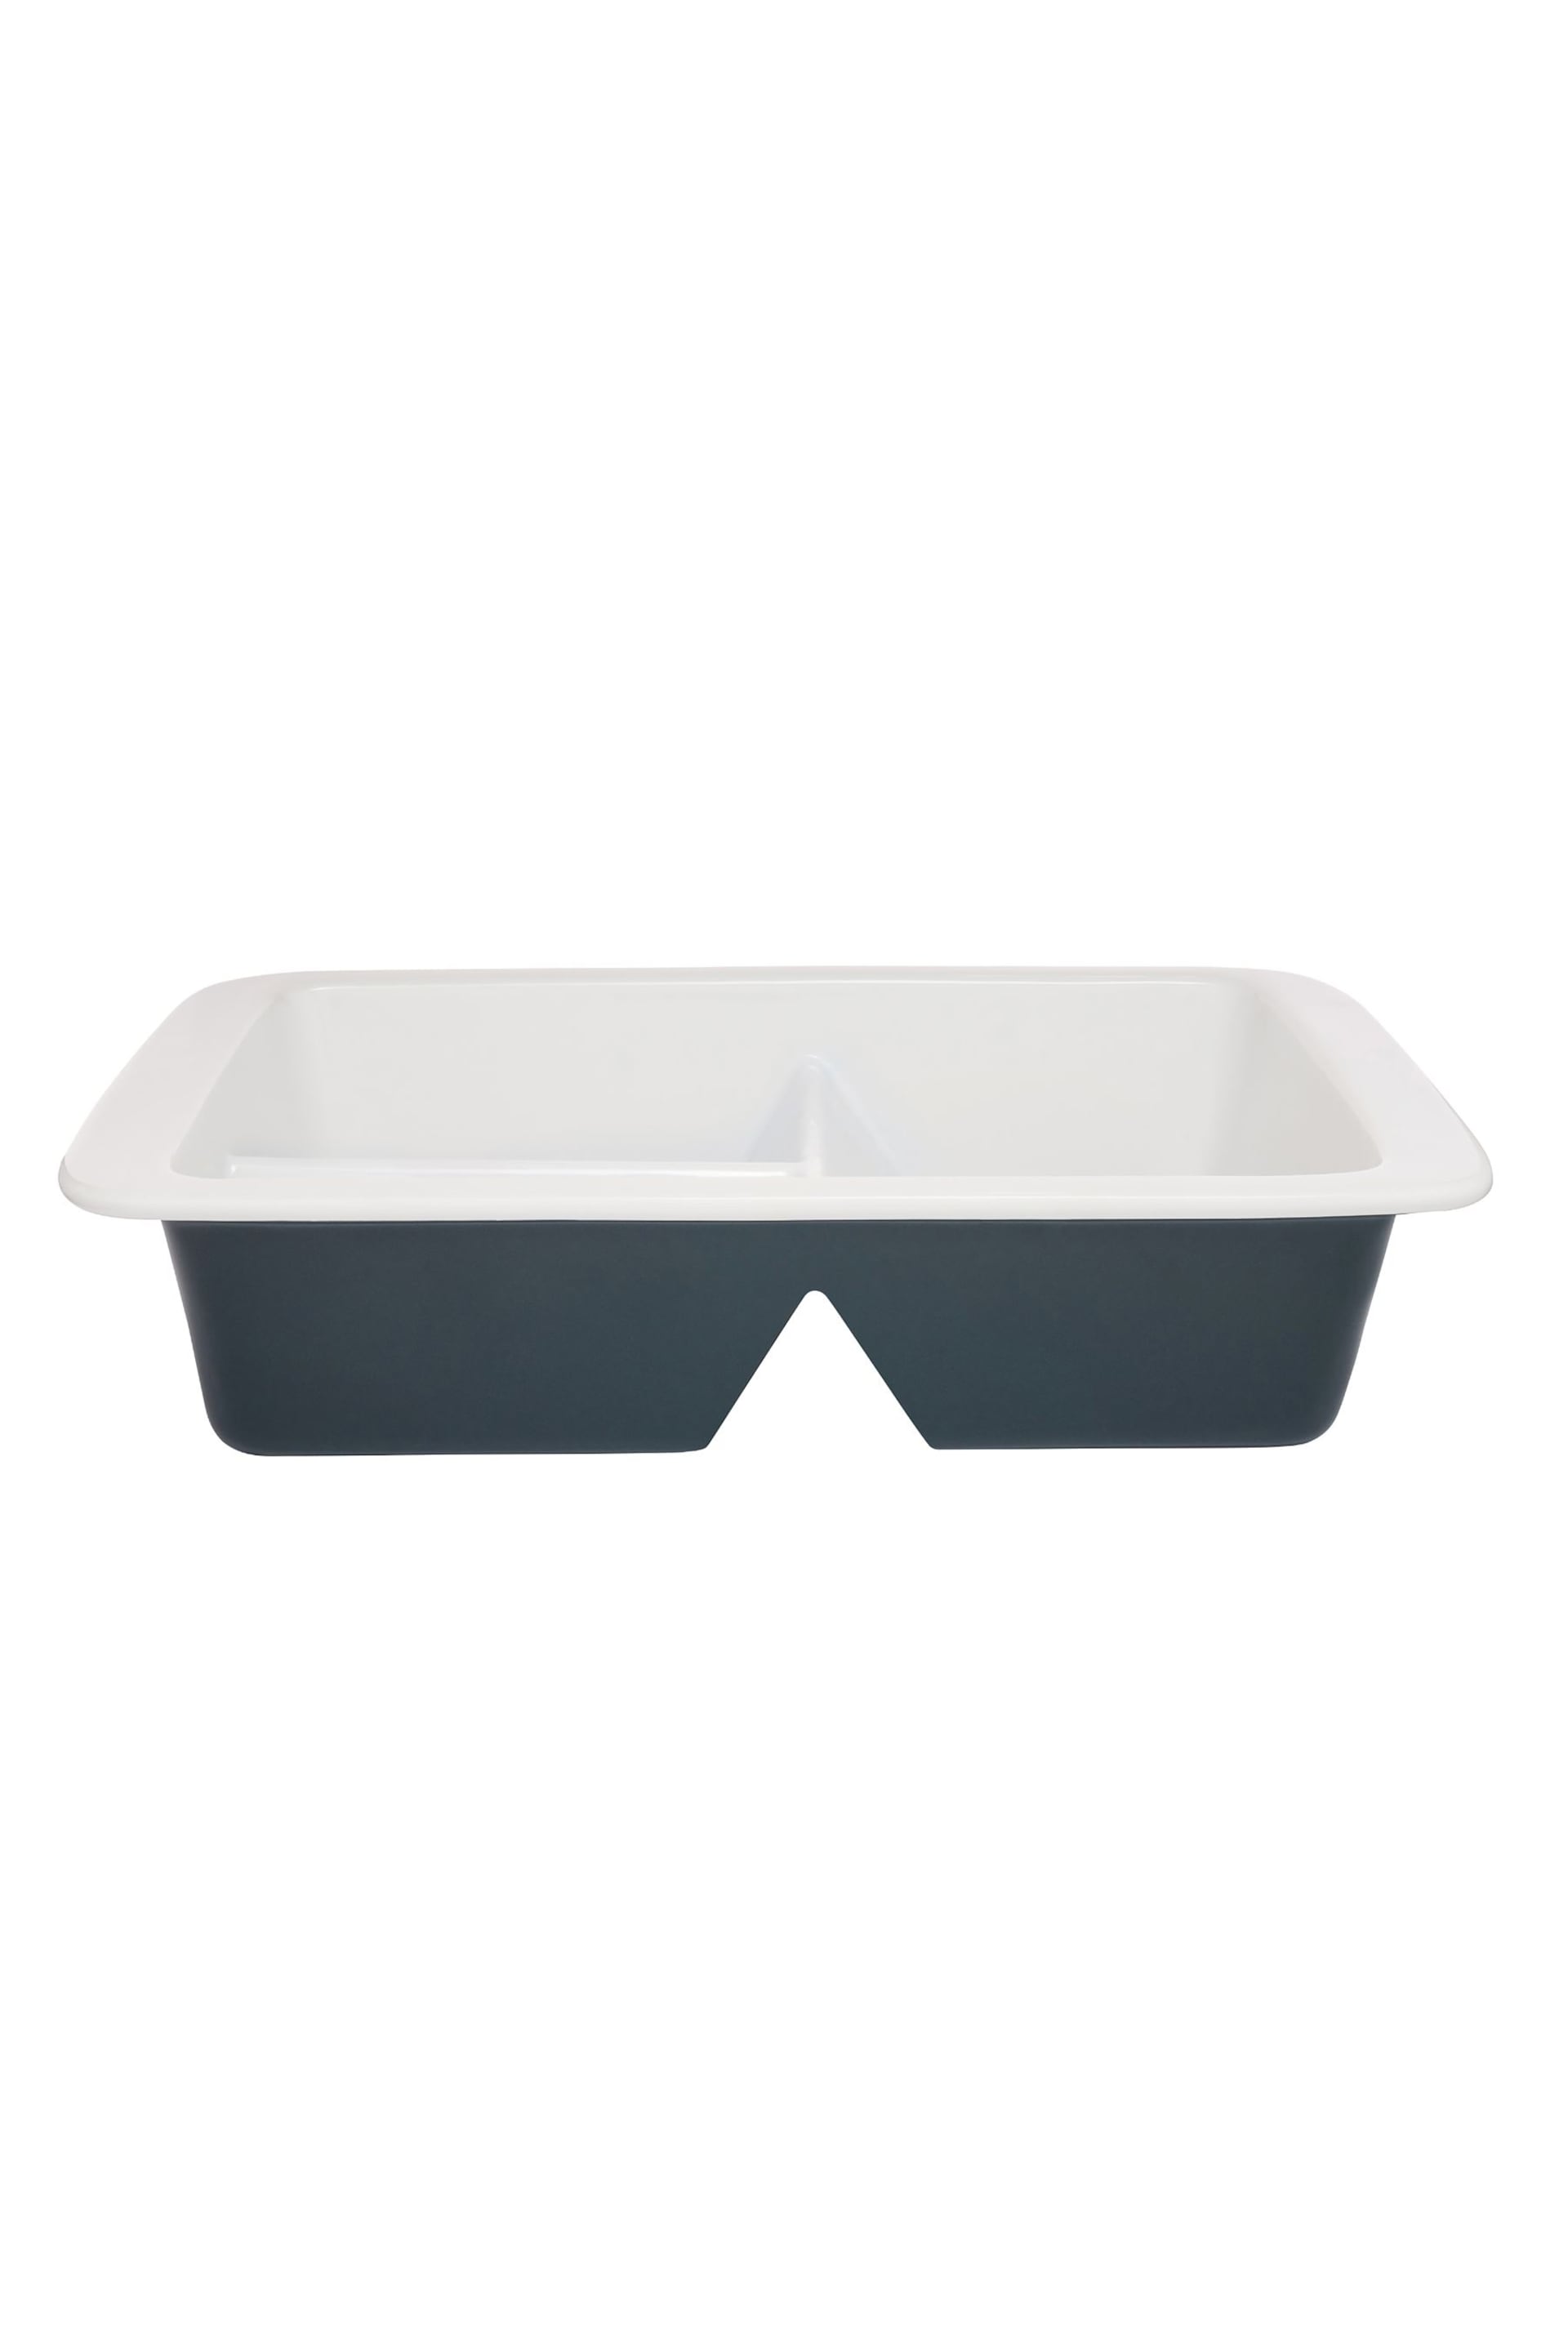 Luxe White 30Cm Rectangular Divided Dish - Image 3 of 3